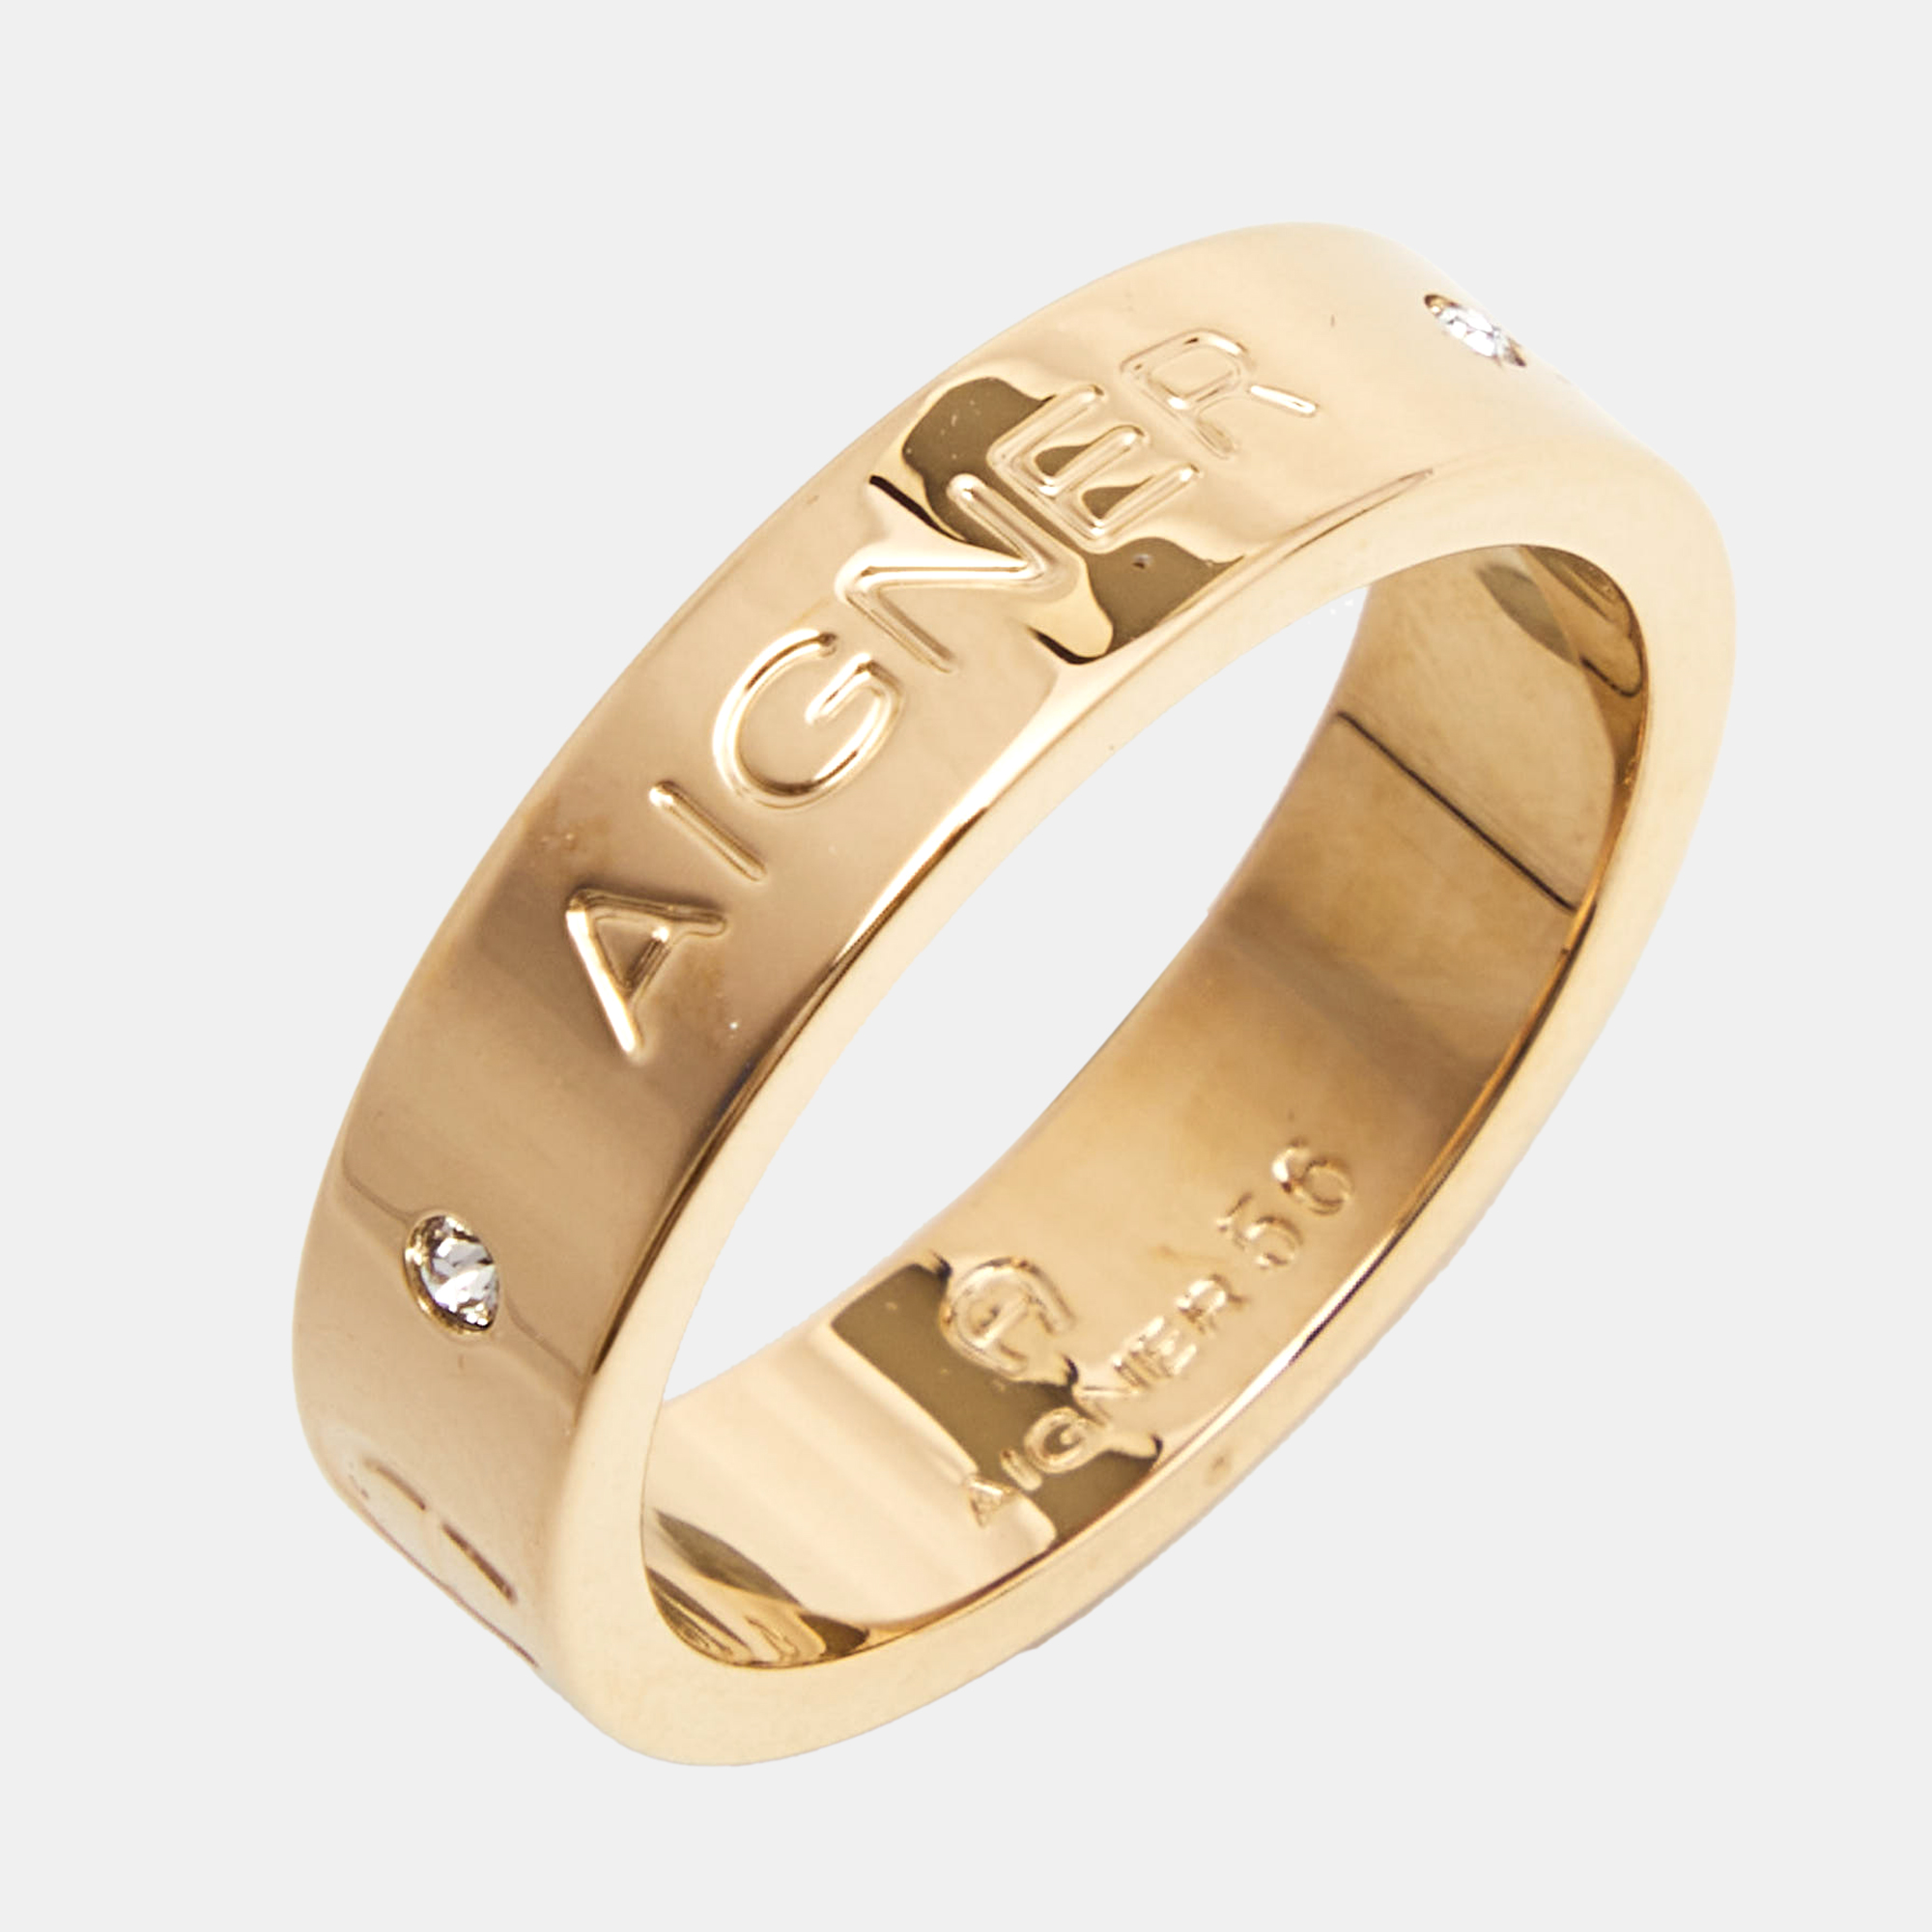 Aigner Crystals Gold Tone Ring Size 55